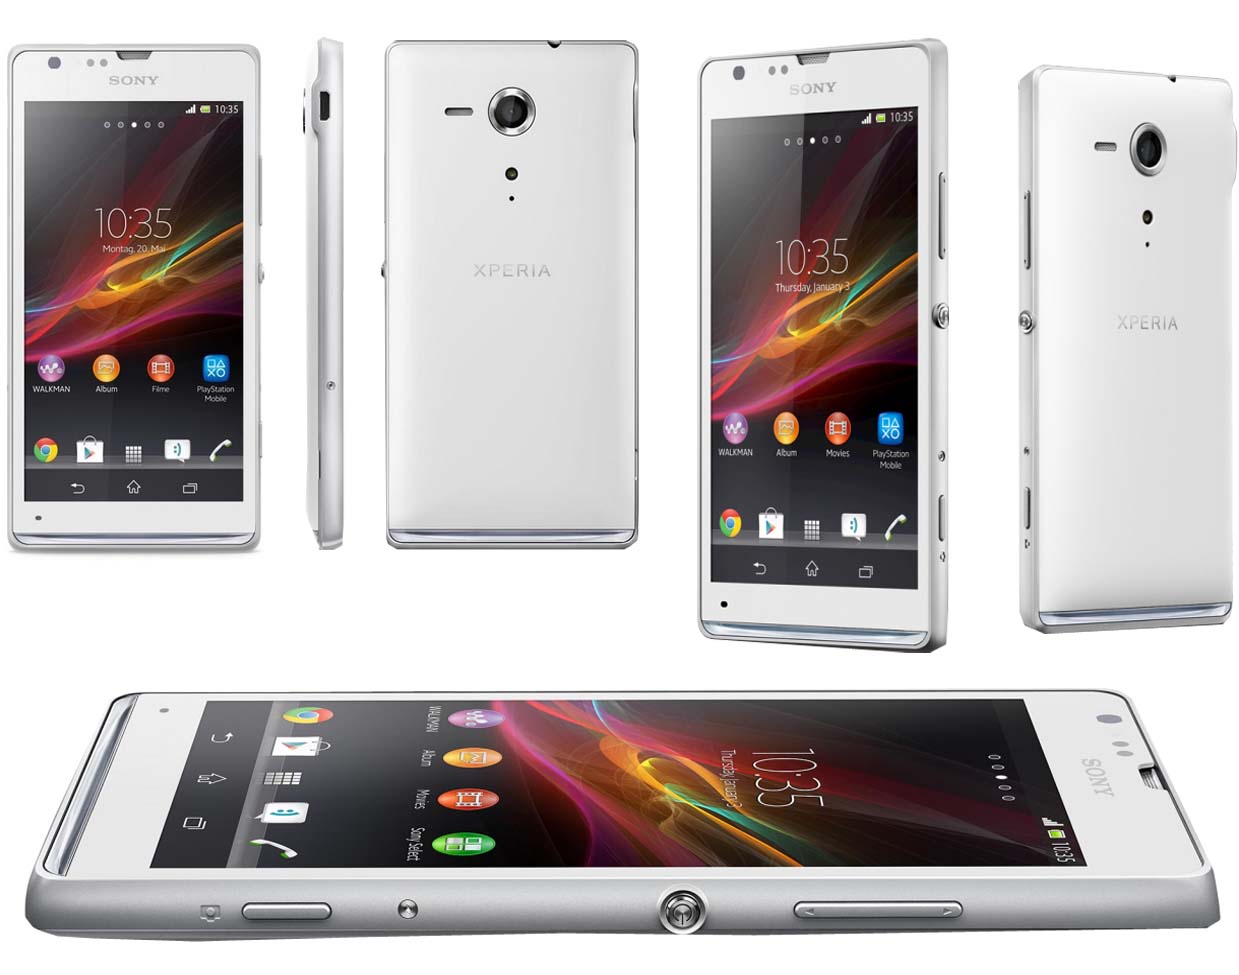 Sony xperia sp specifications